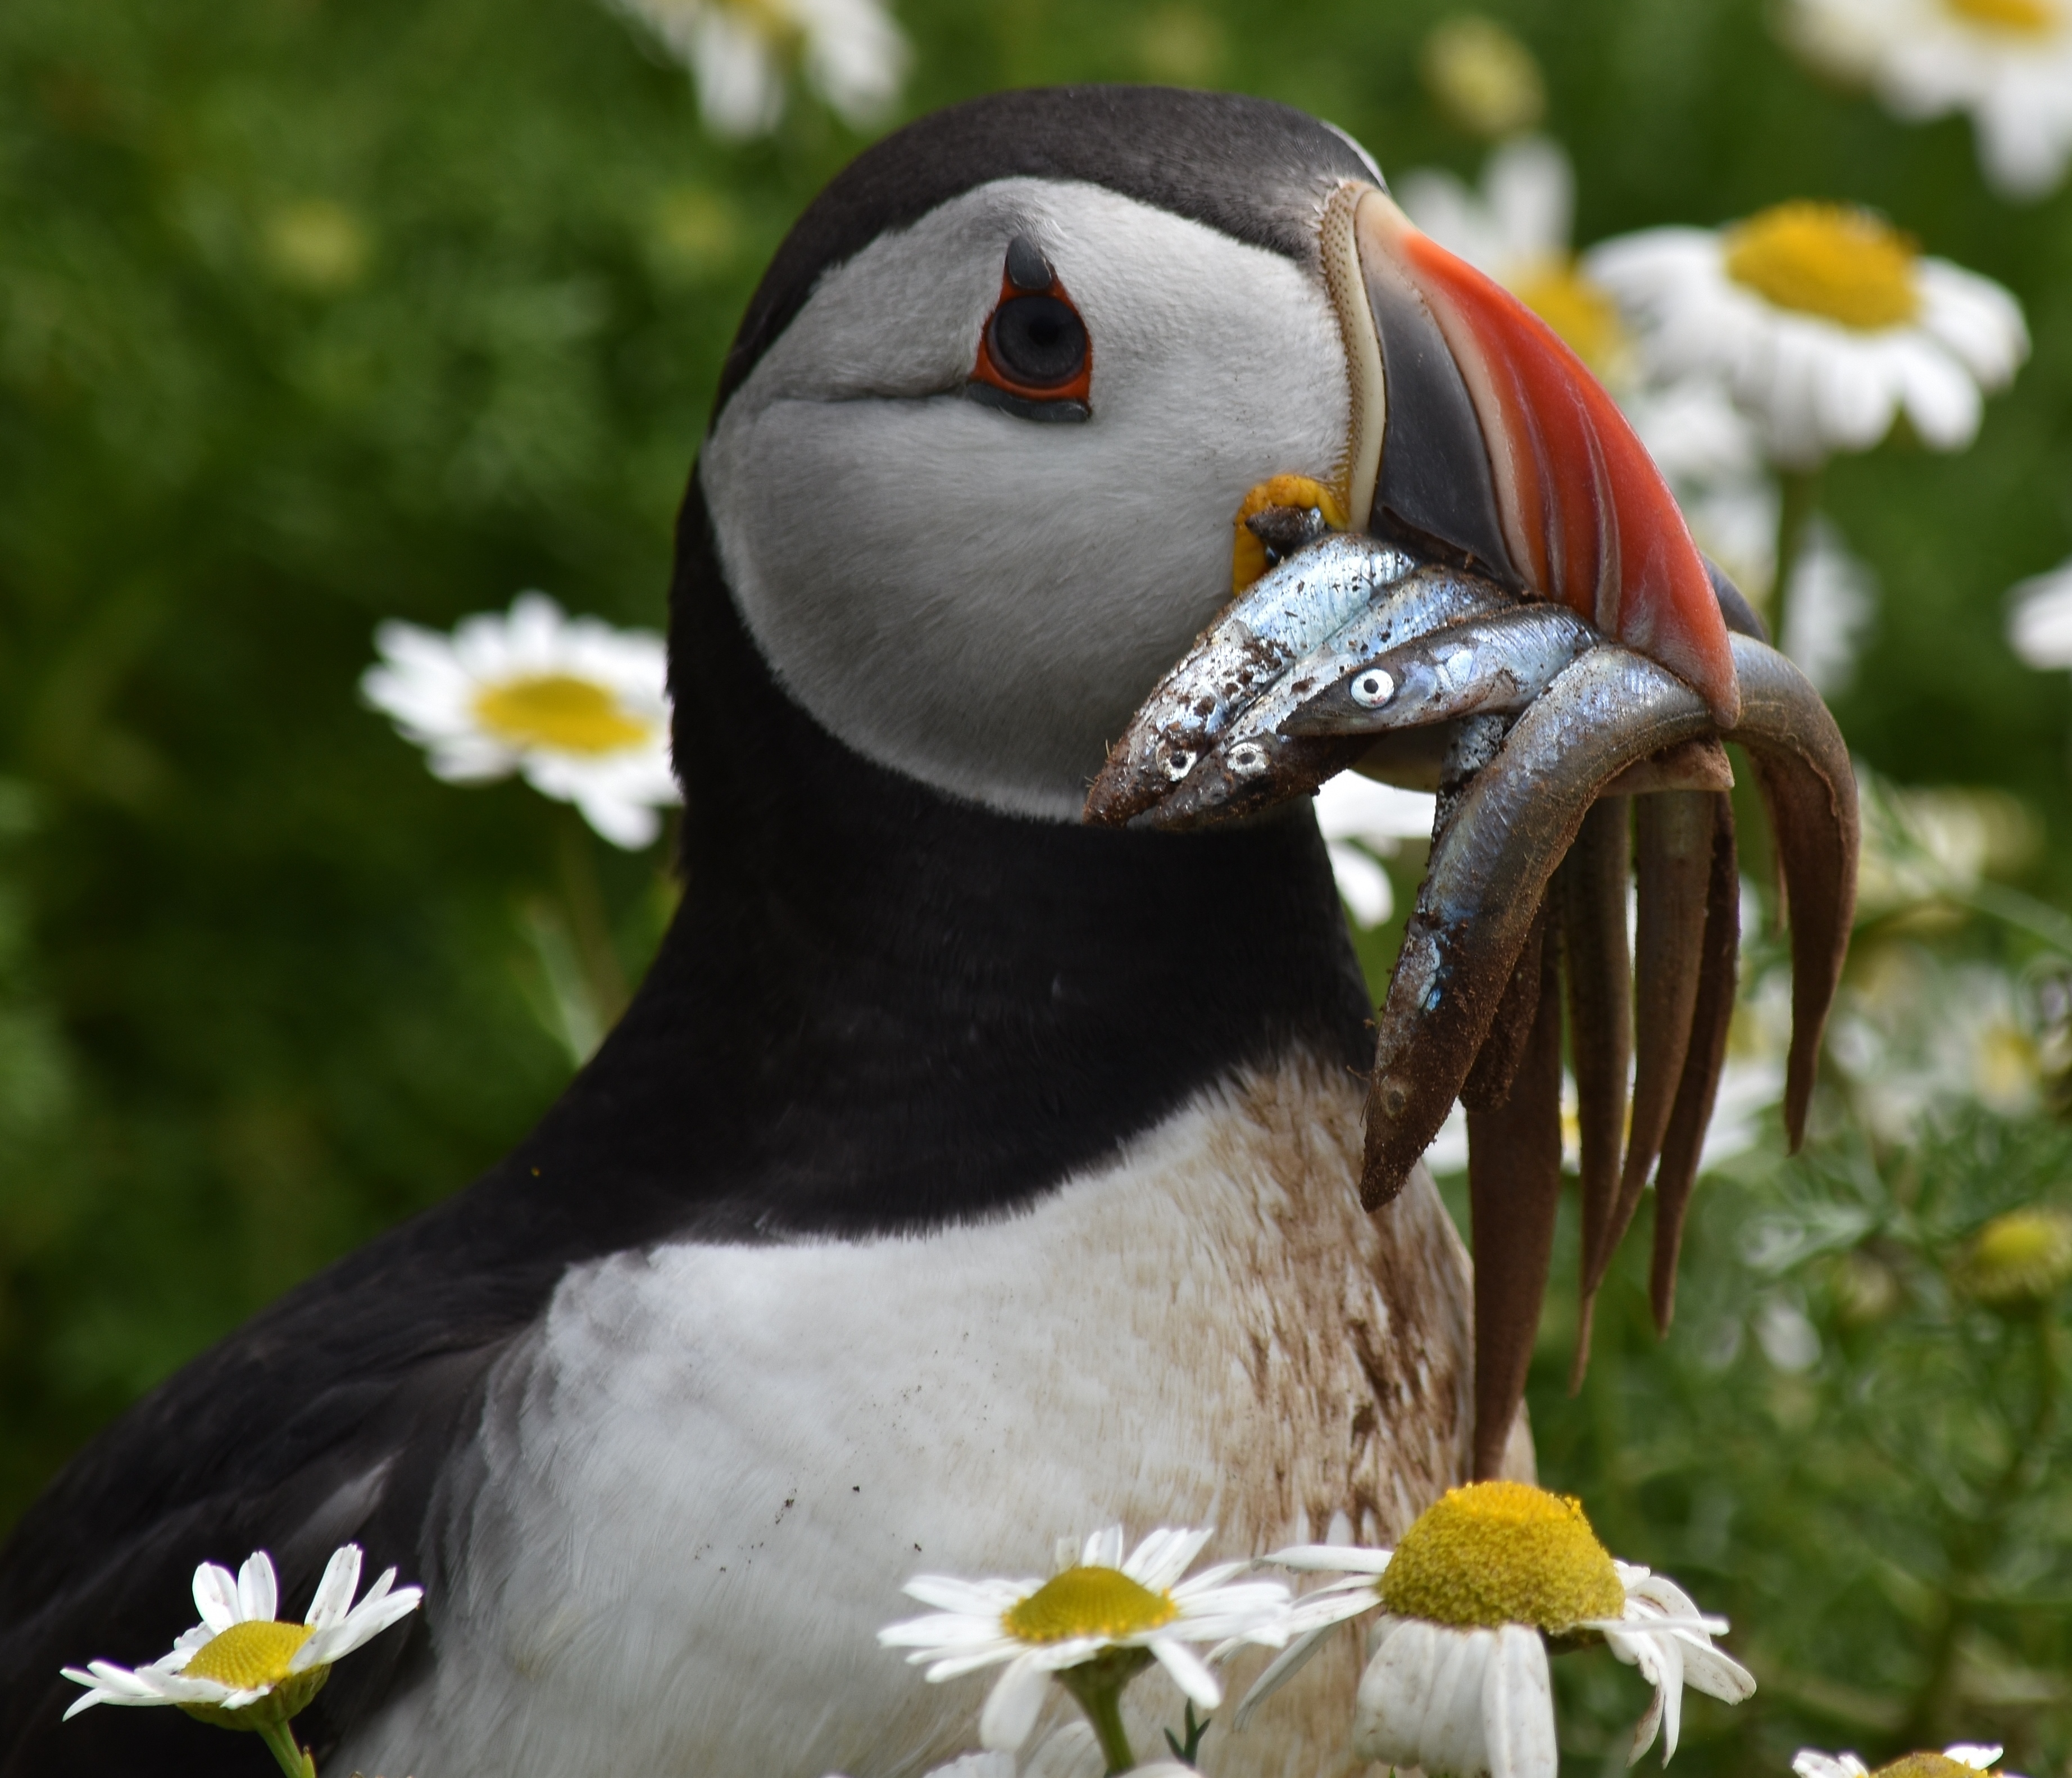 A puffin with food in its mouth. Picture by Melaine Felton